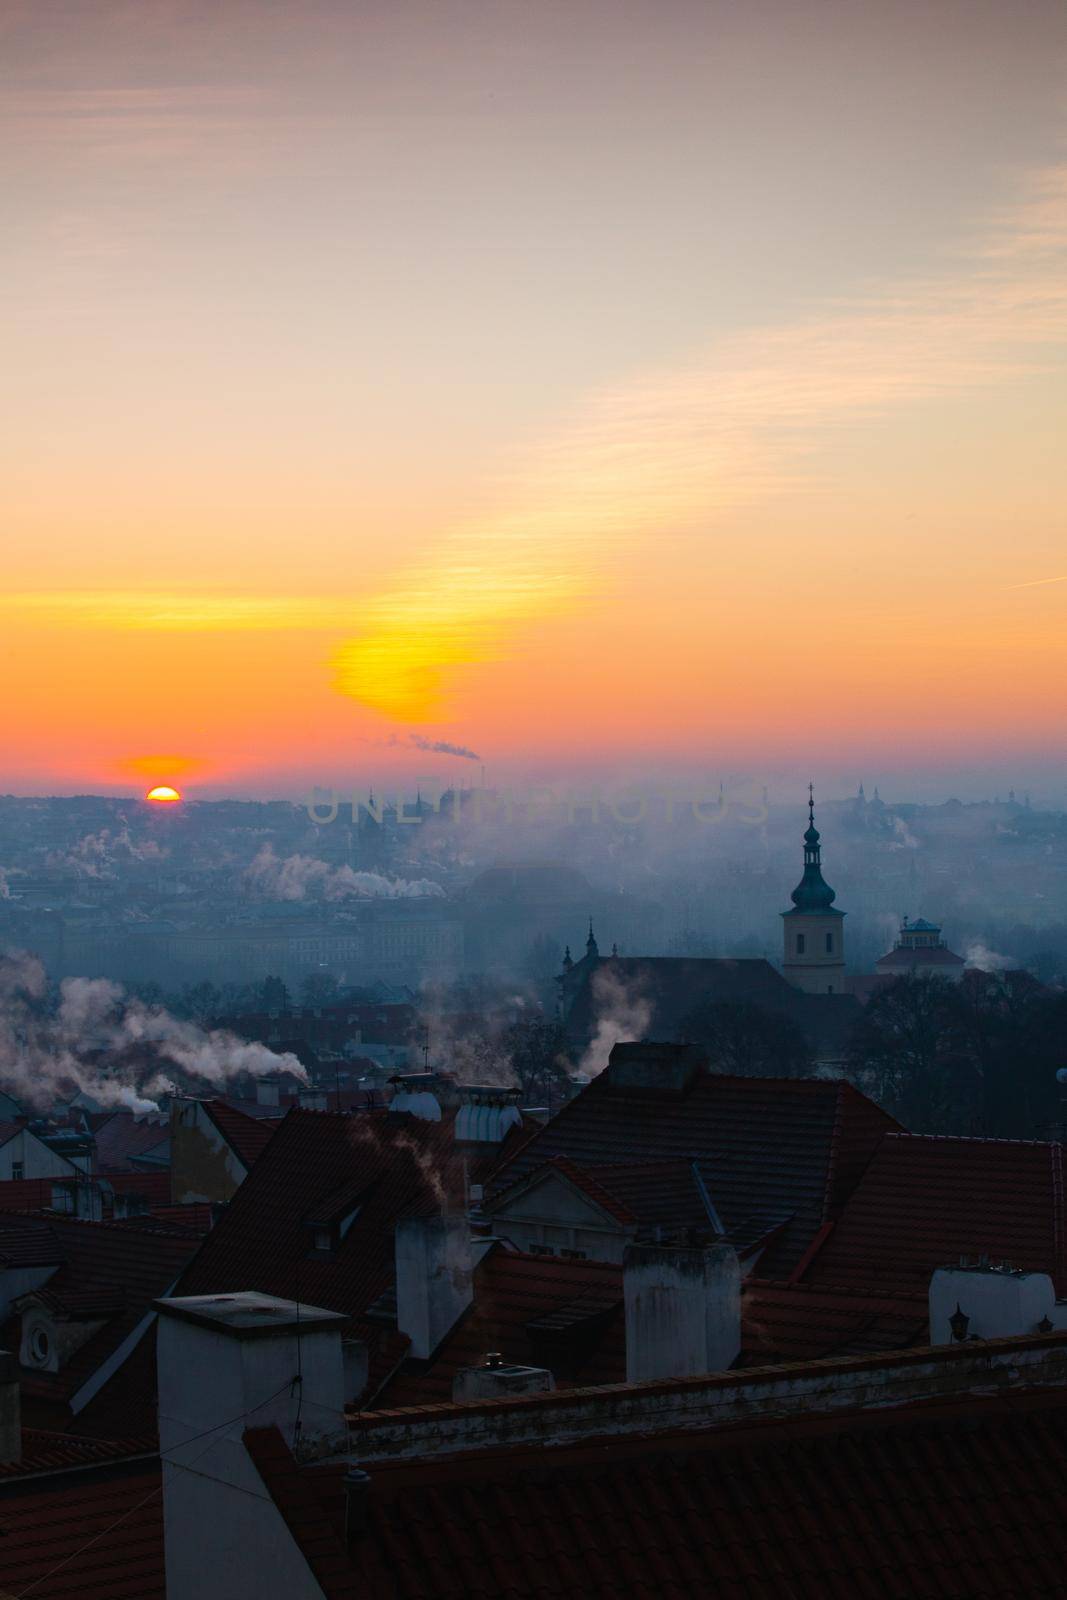 Sunrise over Lesser Town, Prague, Czech Republic. Lesser Town is a hillside area with views across the Vltava river to the old town.